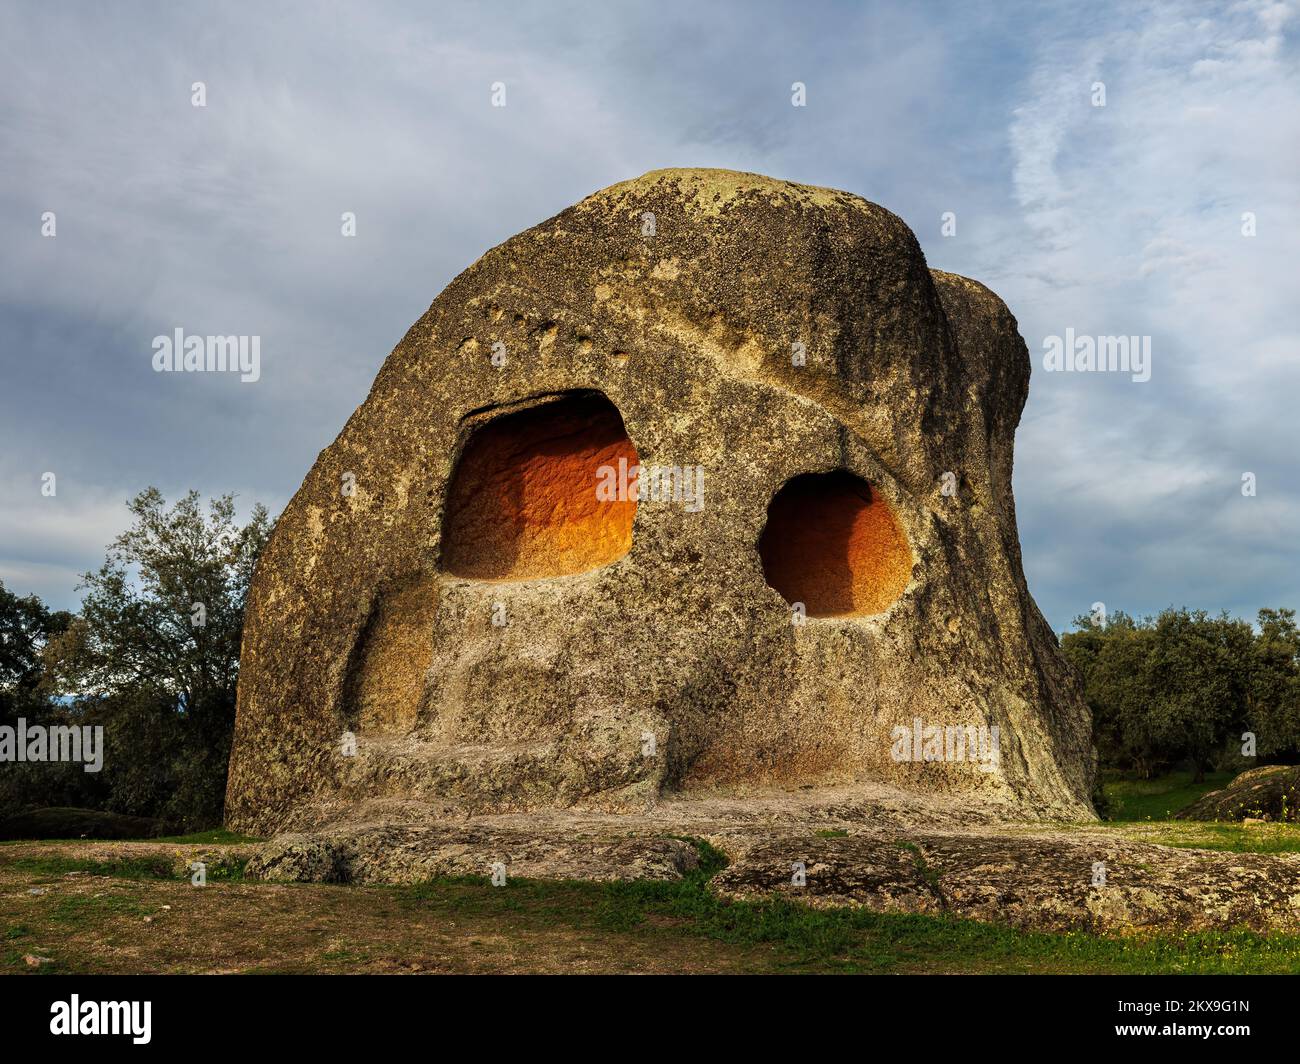 Canchal de los Ojos is a singular rock with two cavities similar to eyes. Ancient prehistoric temple located in Piedras Albas. Spain. Stock Photo